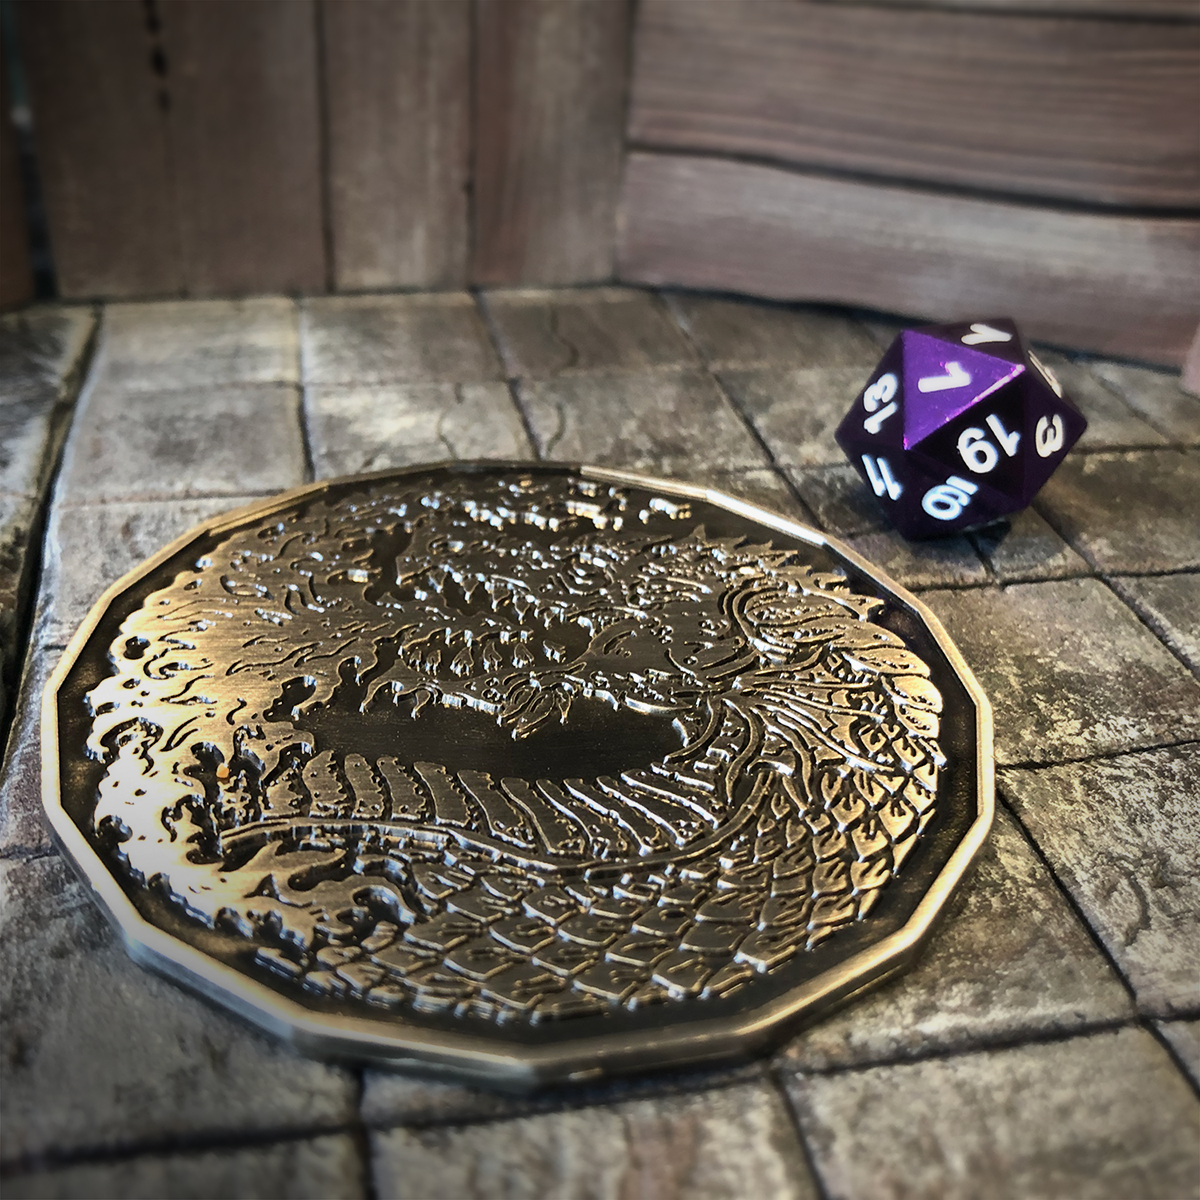 Fire Breathing Dragon Coin on Dungeon Tiles